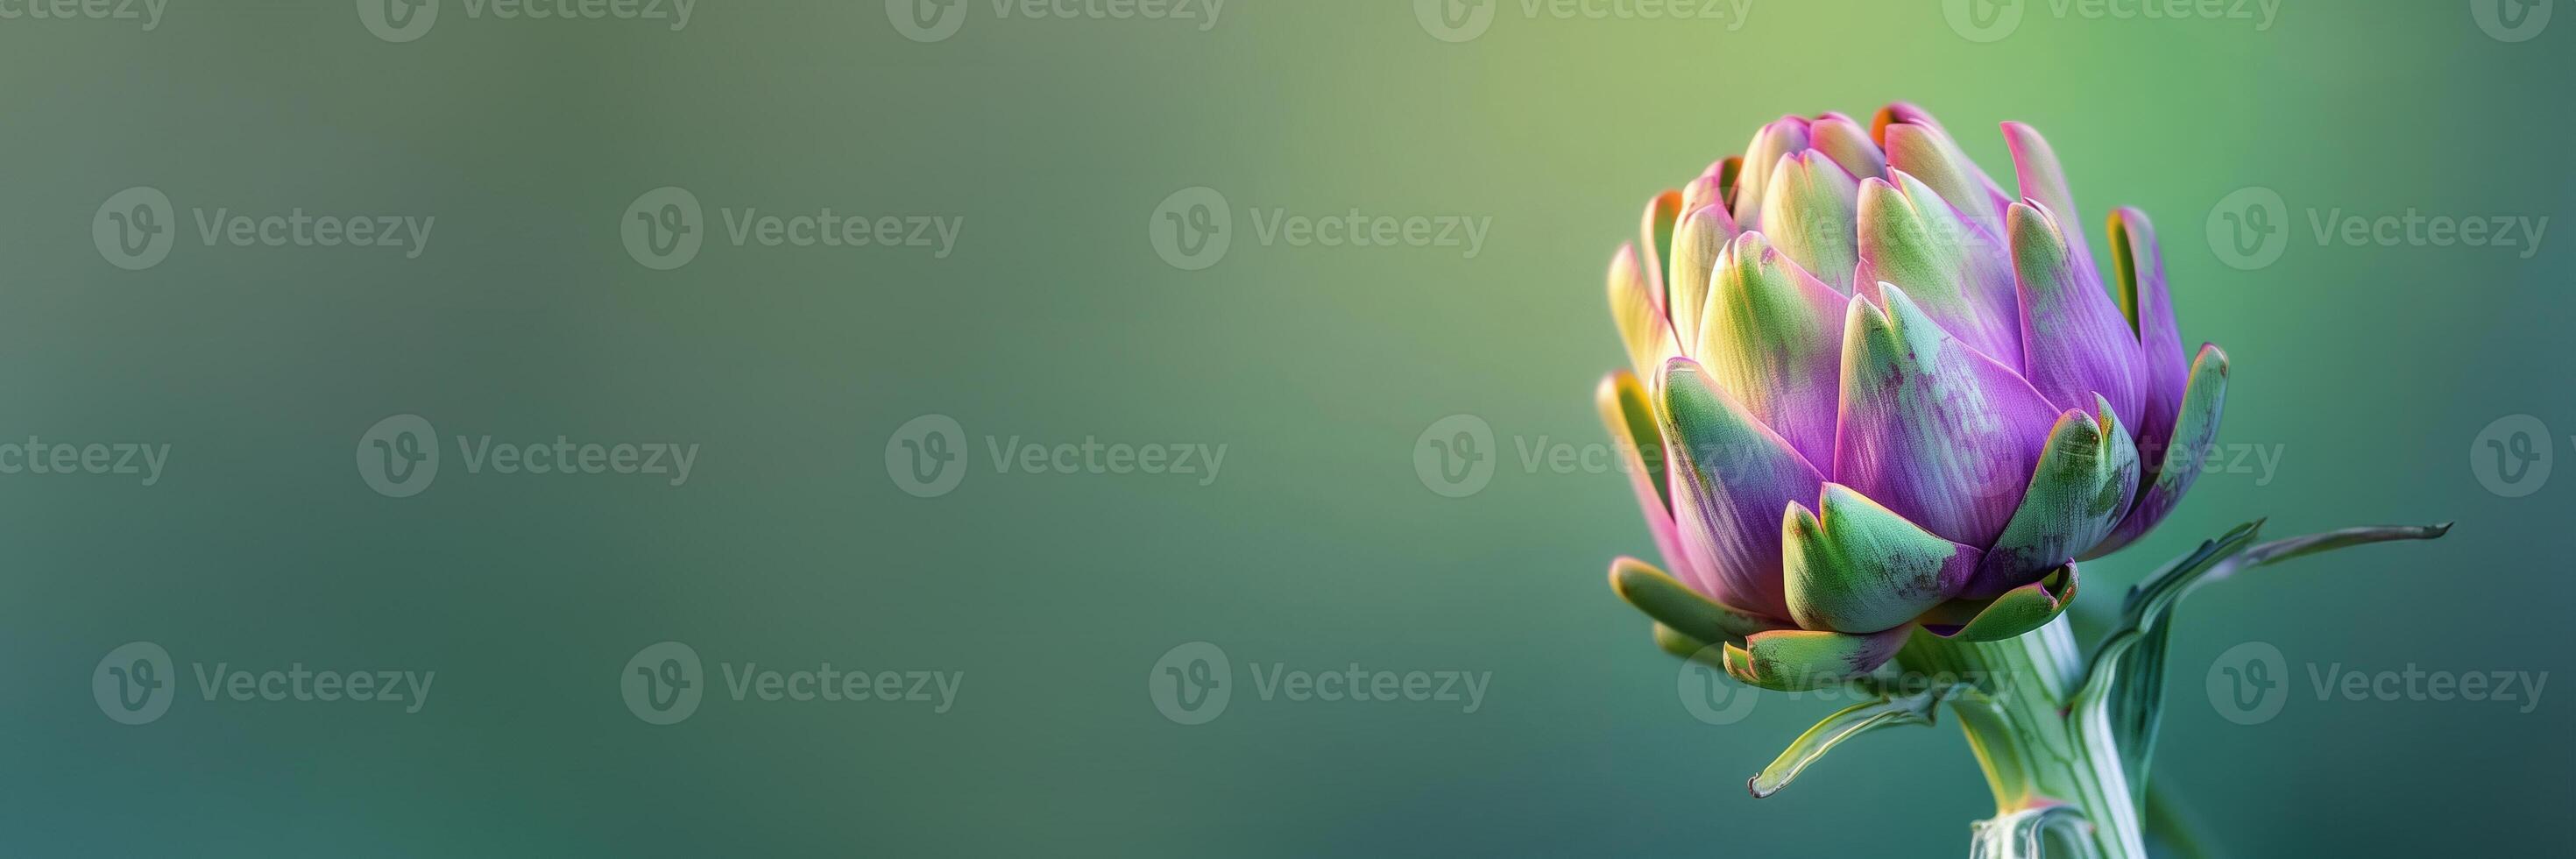 artichoke flower close up isolated on a green gradient background photo